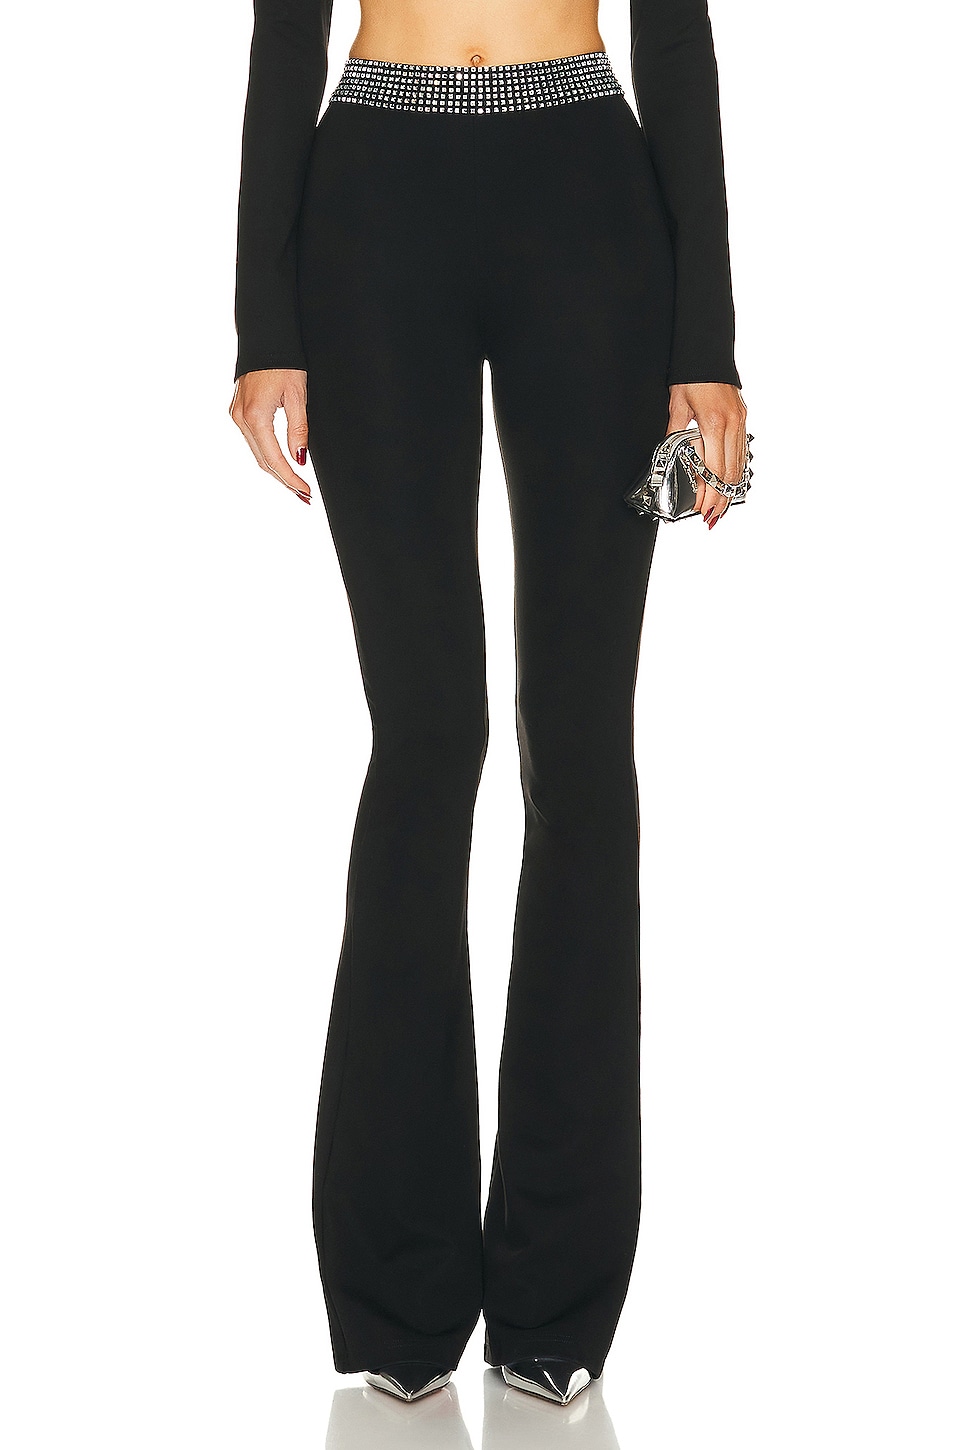 Image 1 of David Koma Crystal Embroidered Trouser in Black & Silver